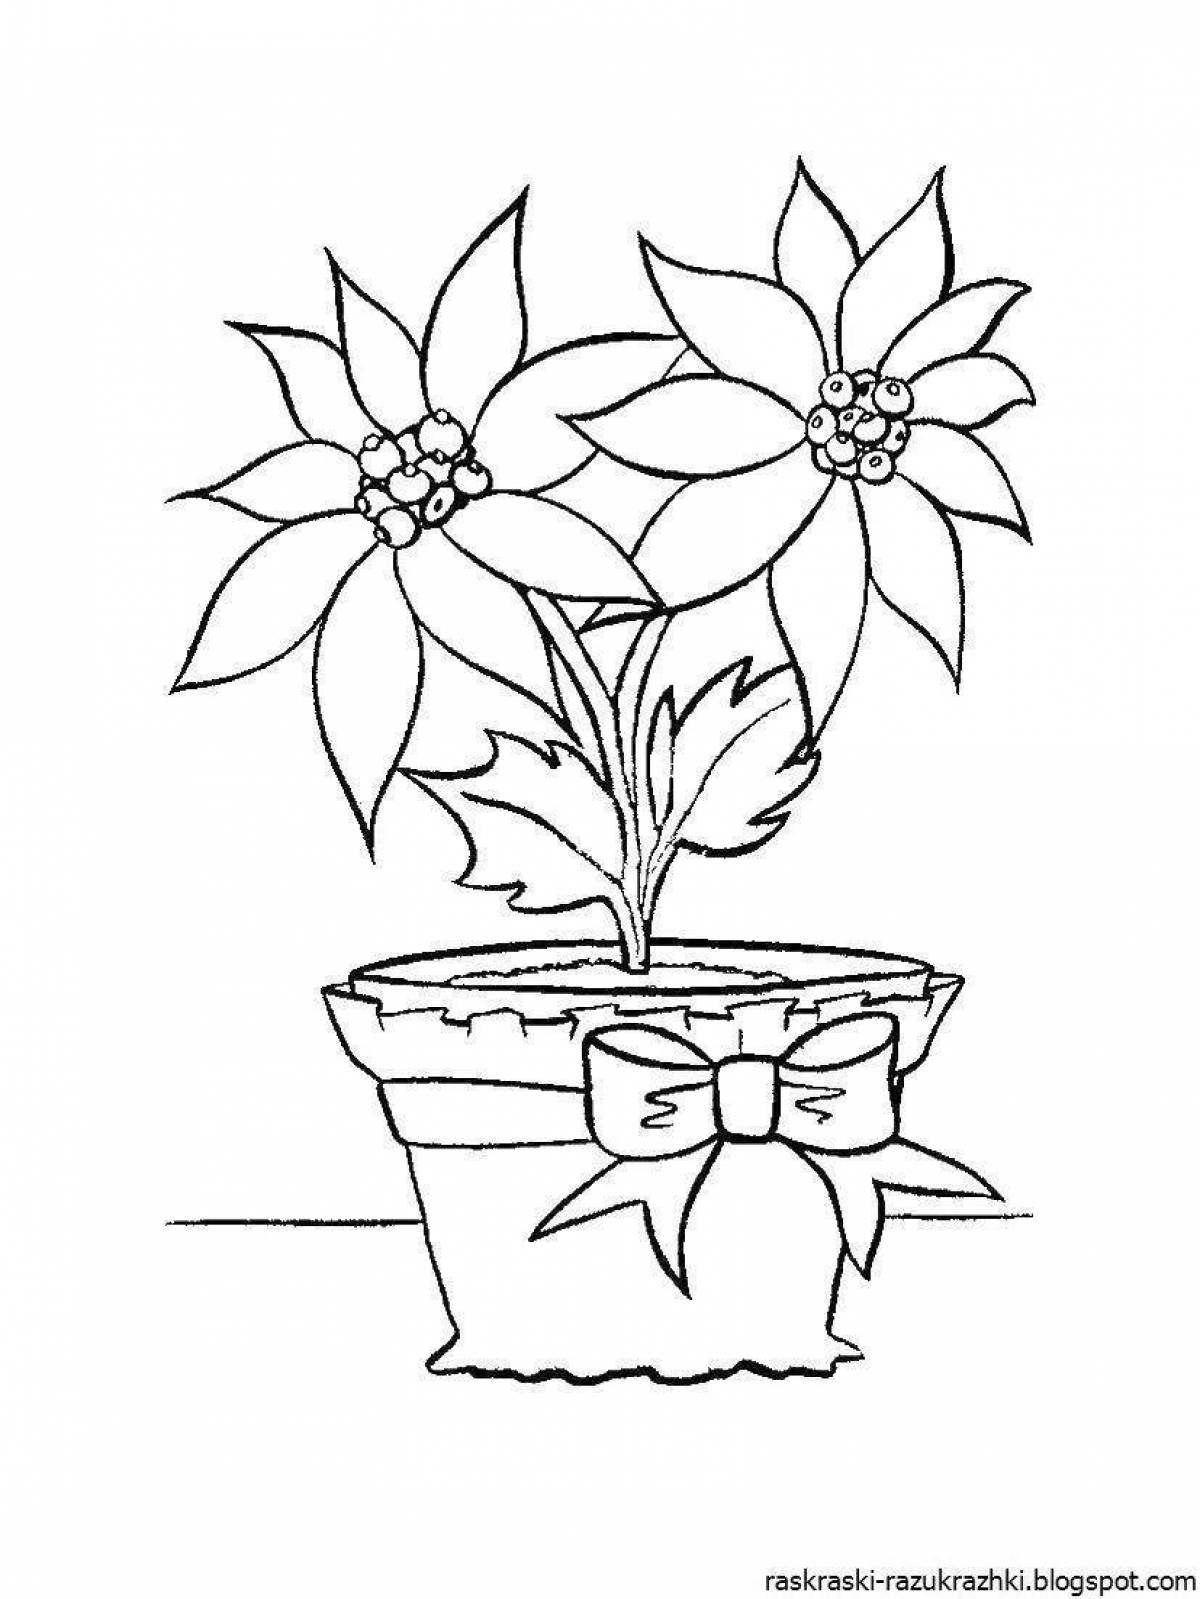 Coloring book with bright indoor plants for children 4-5 years old